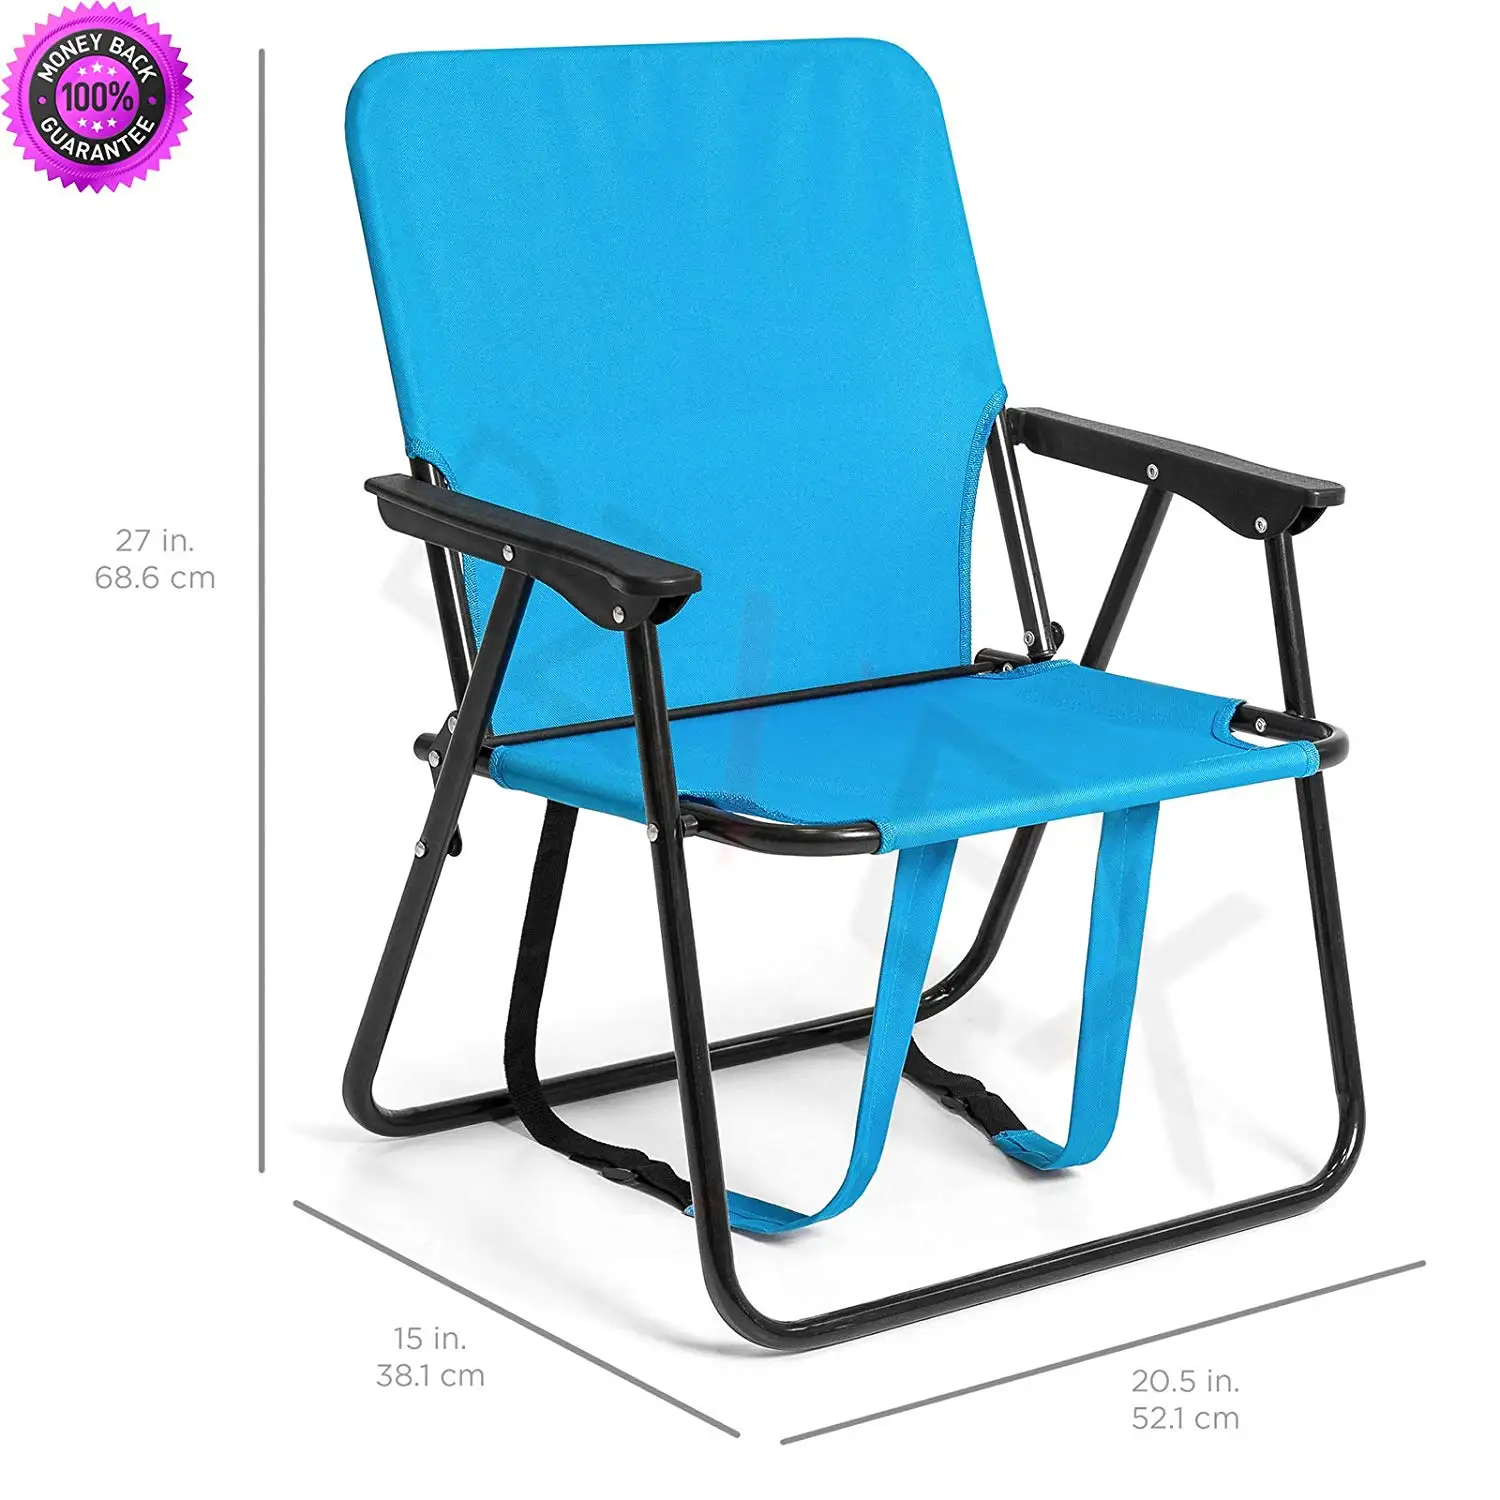 cheap backpack lawn chairs find backpack lawn chairs deals